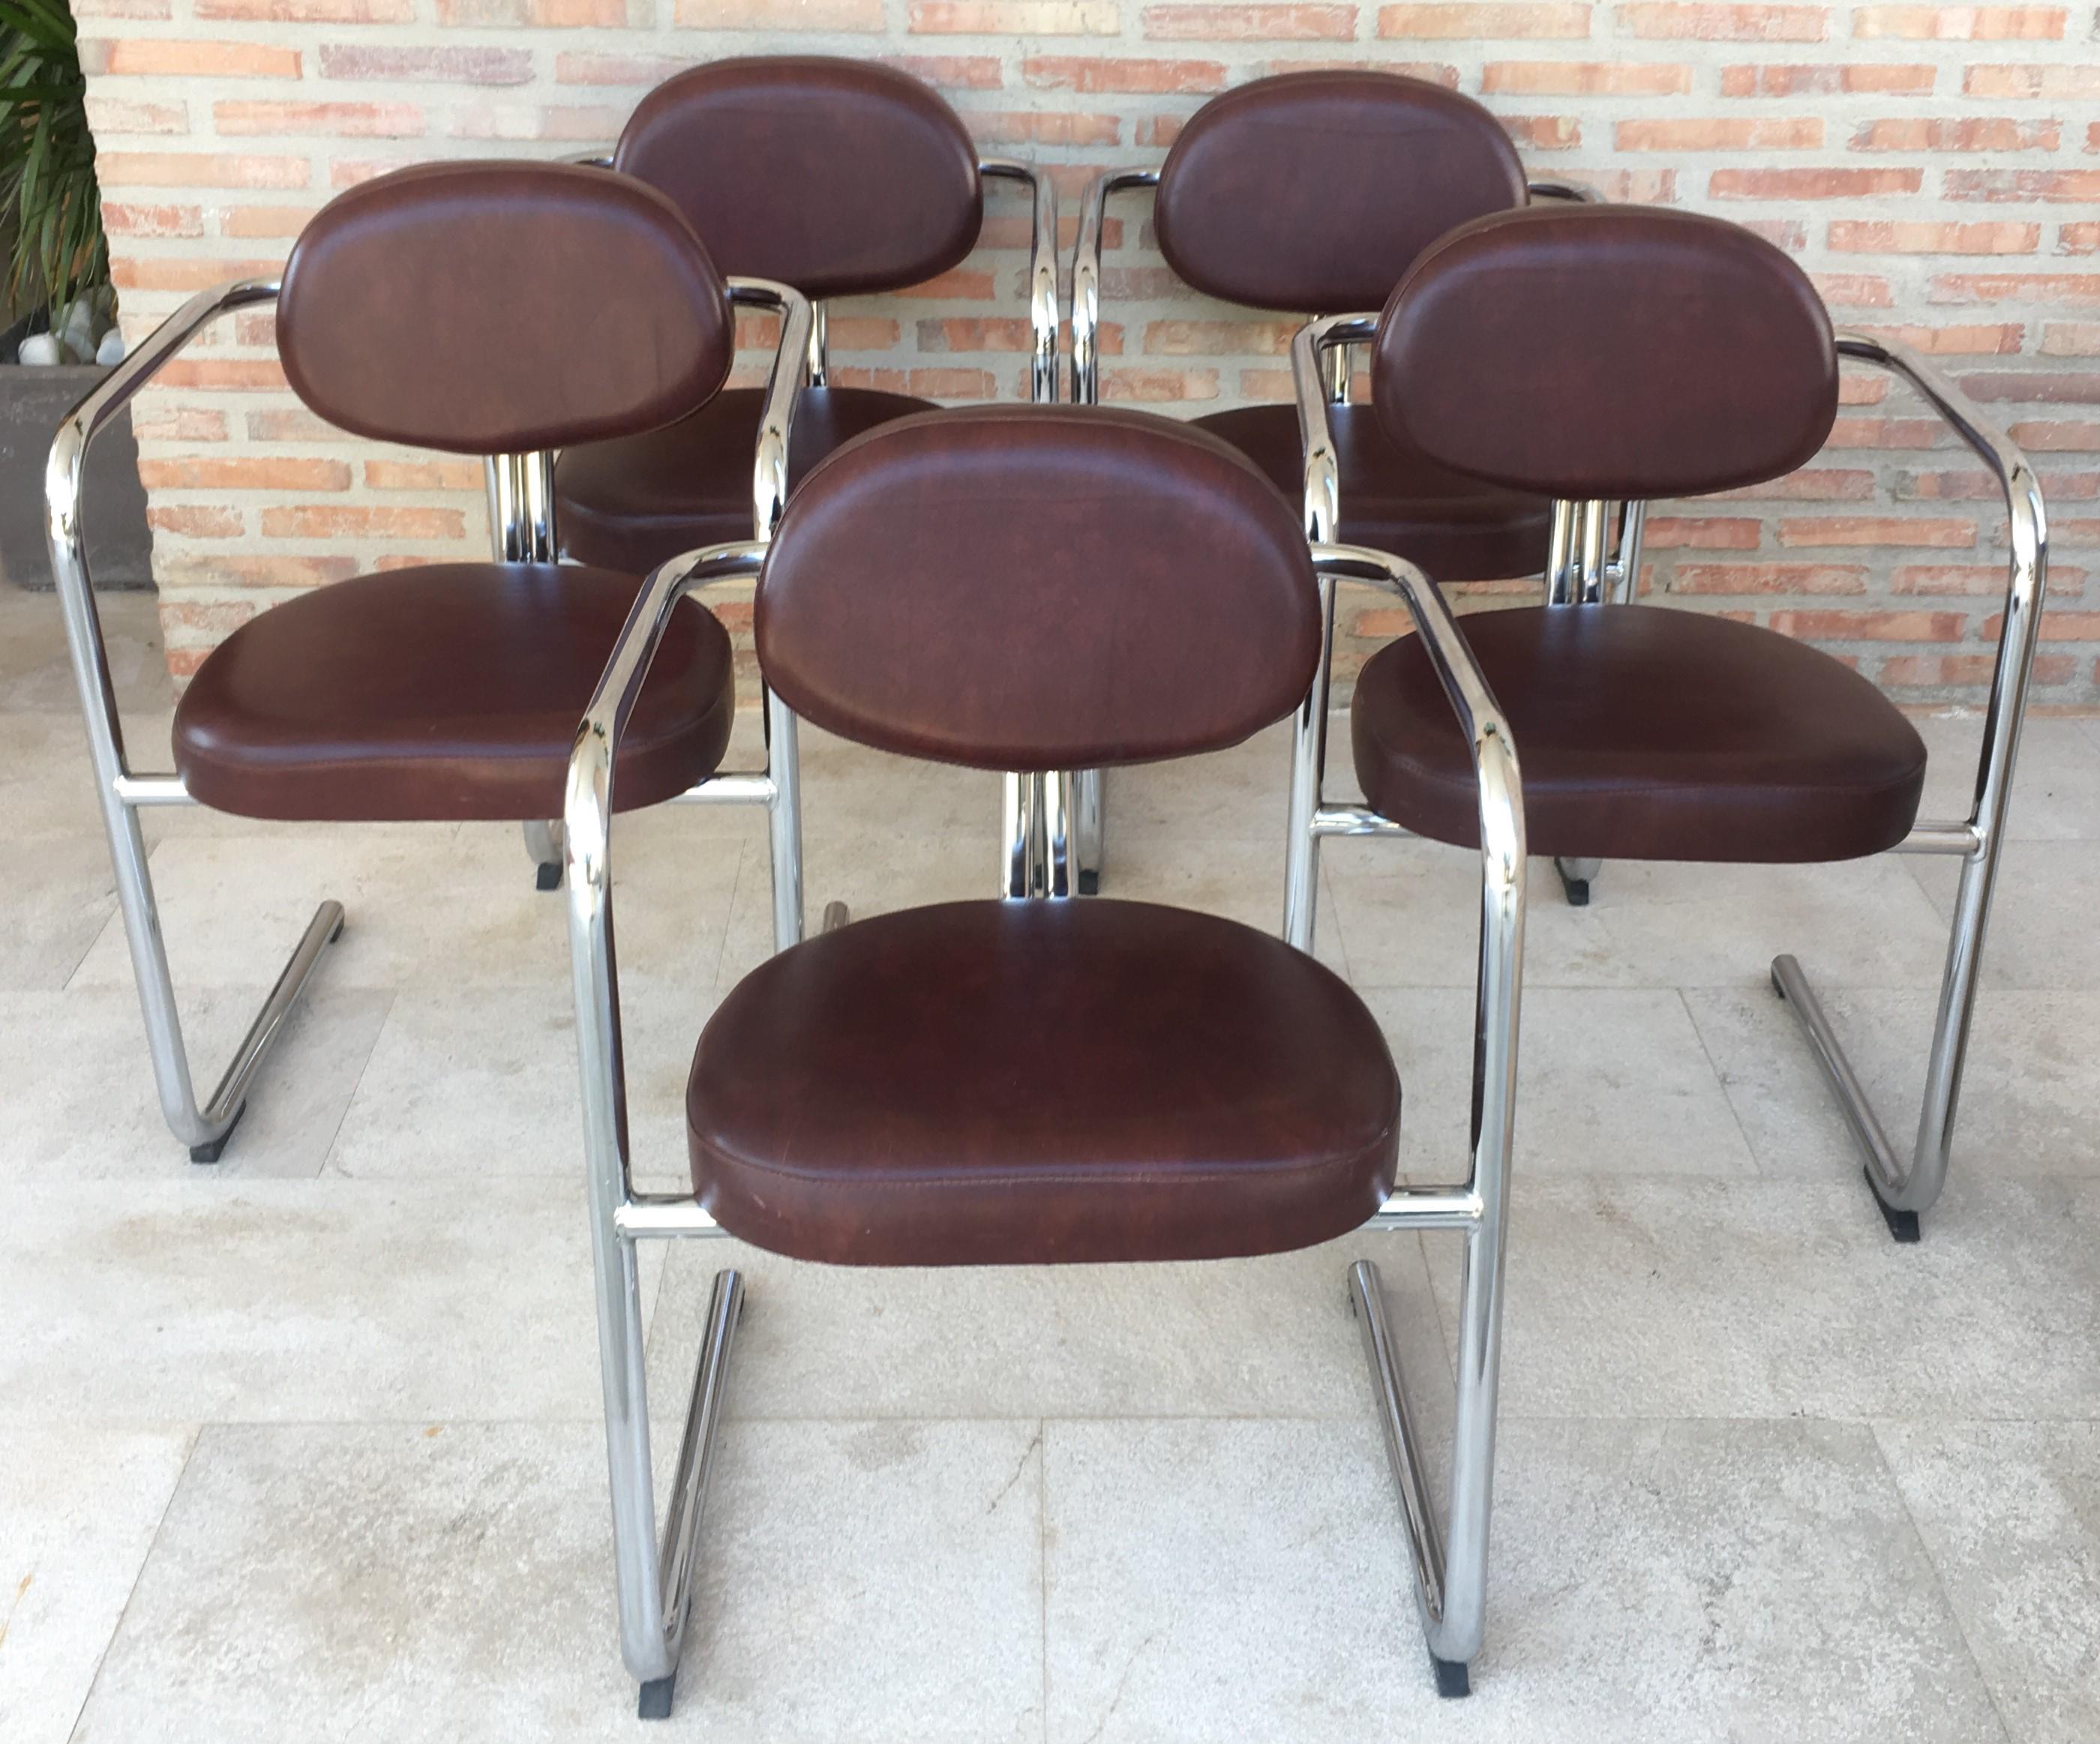 Vintage Italian brown leather and chrome armchairs, 1980s, set of five.